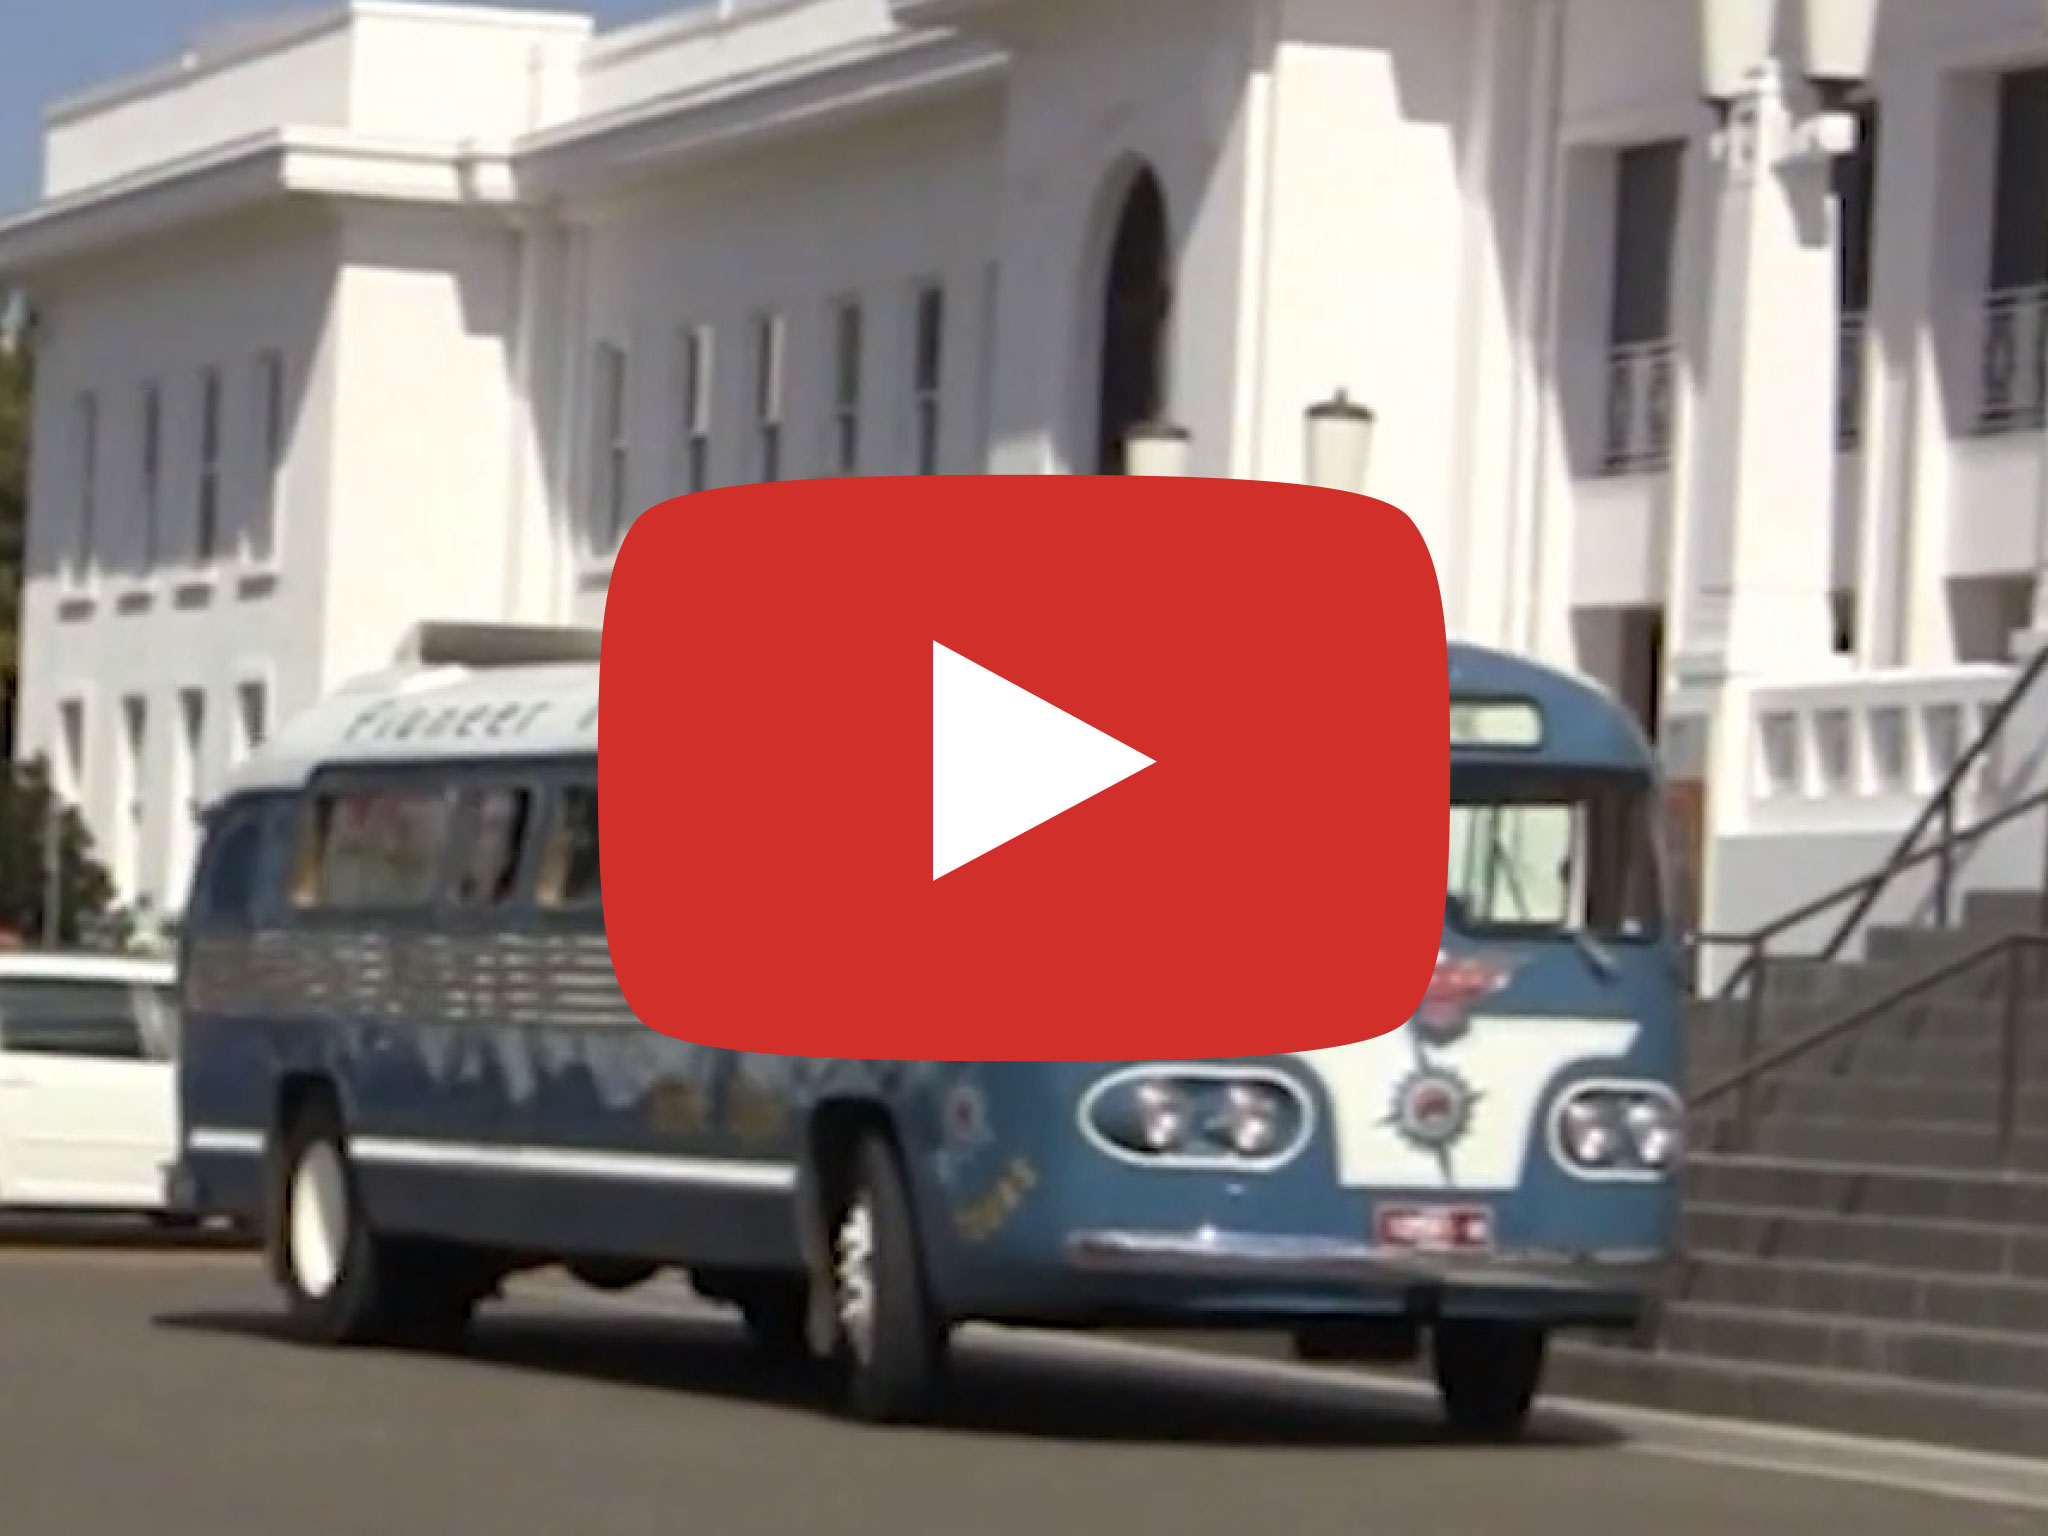 Flxible Clipper bus, 1954 model, Driving in Canberra ACT, Video taken by David Kemp in 2015